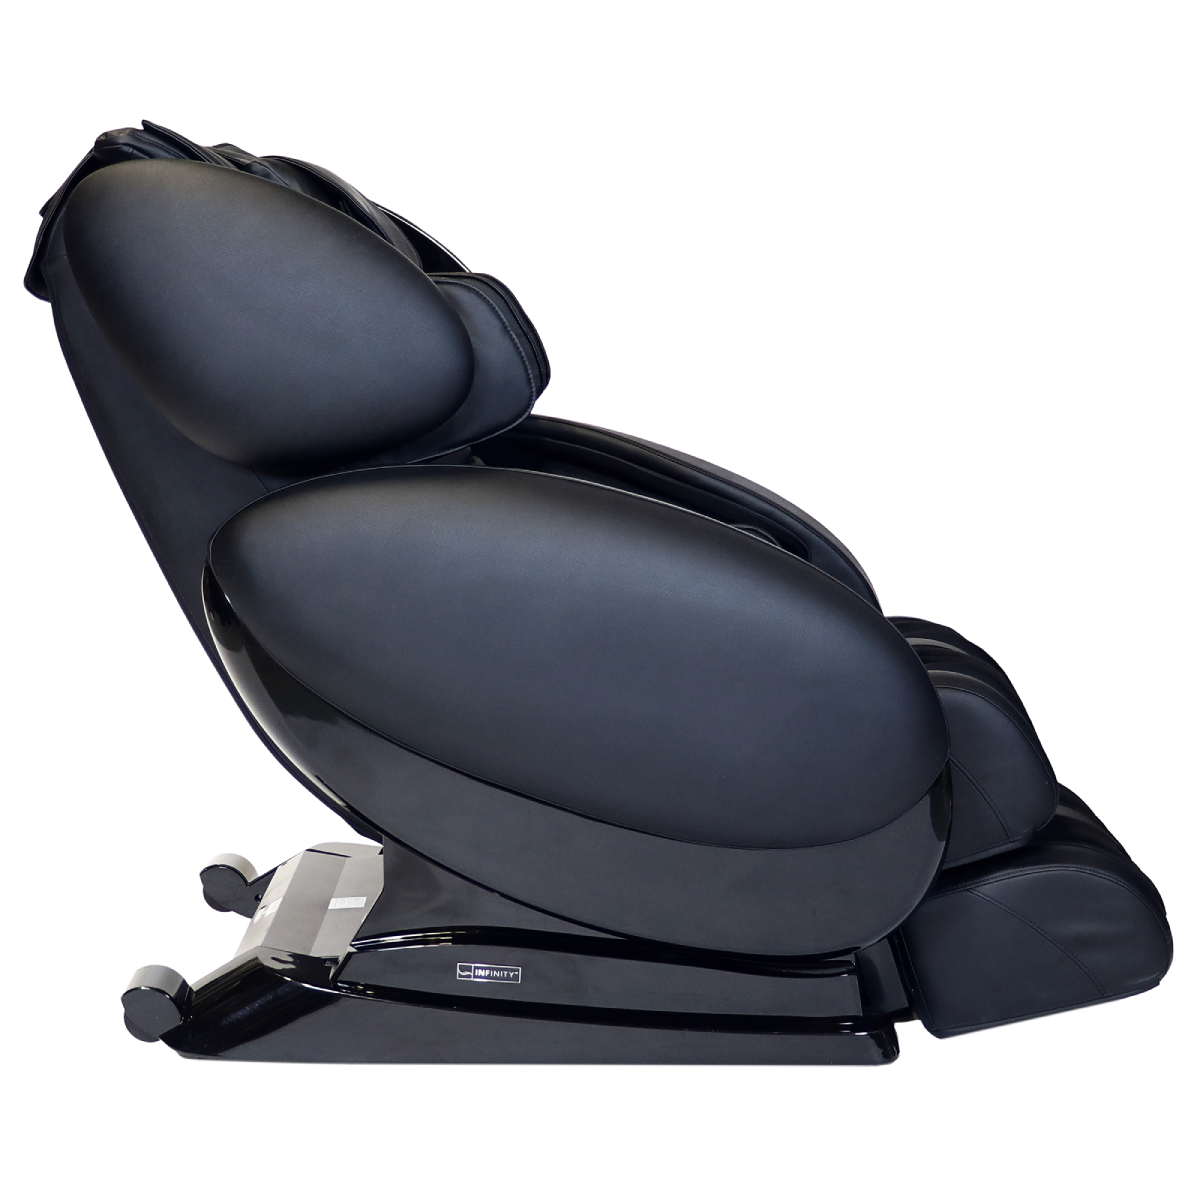 Infinity IT-8500 Plus Massage Chair in Black - Home Bars USA